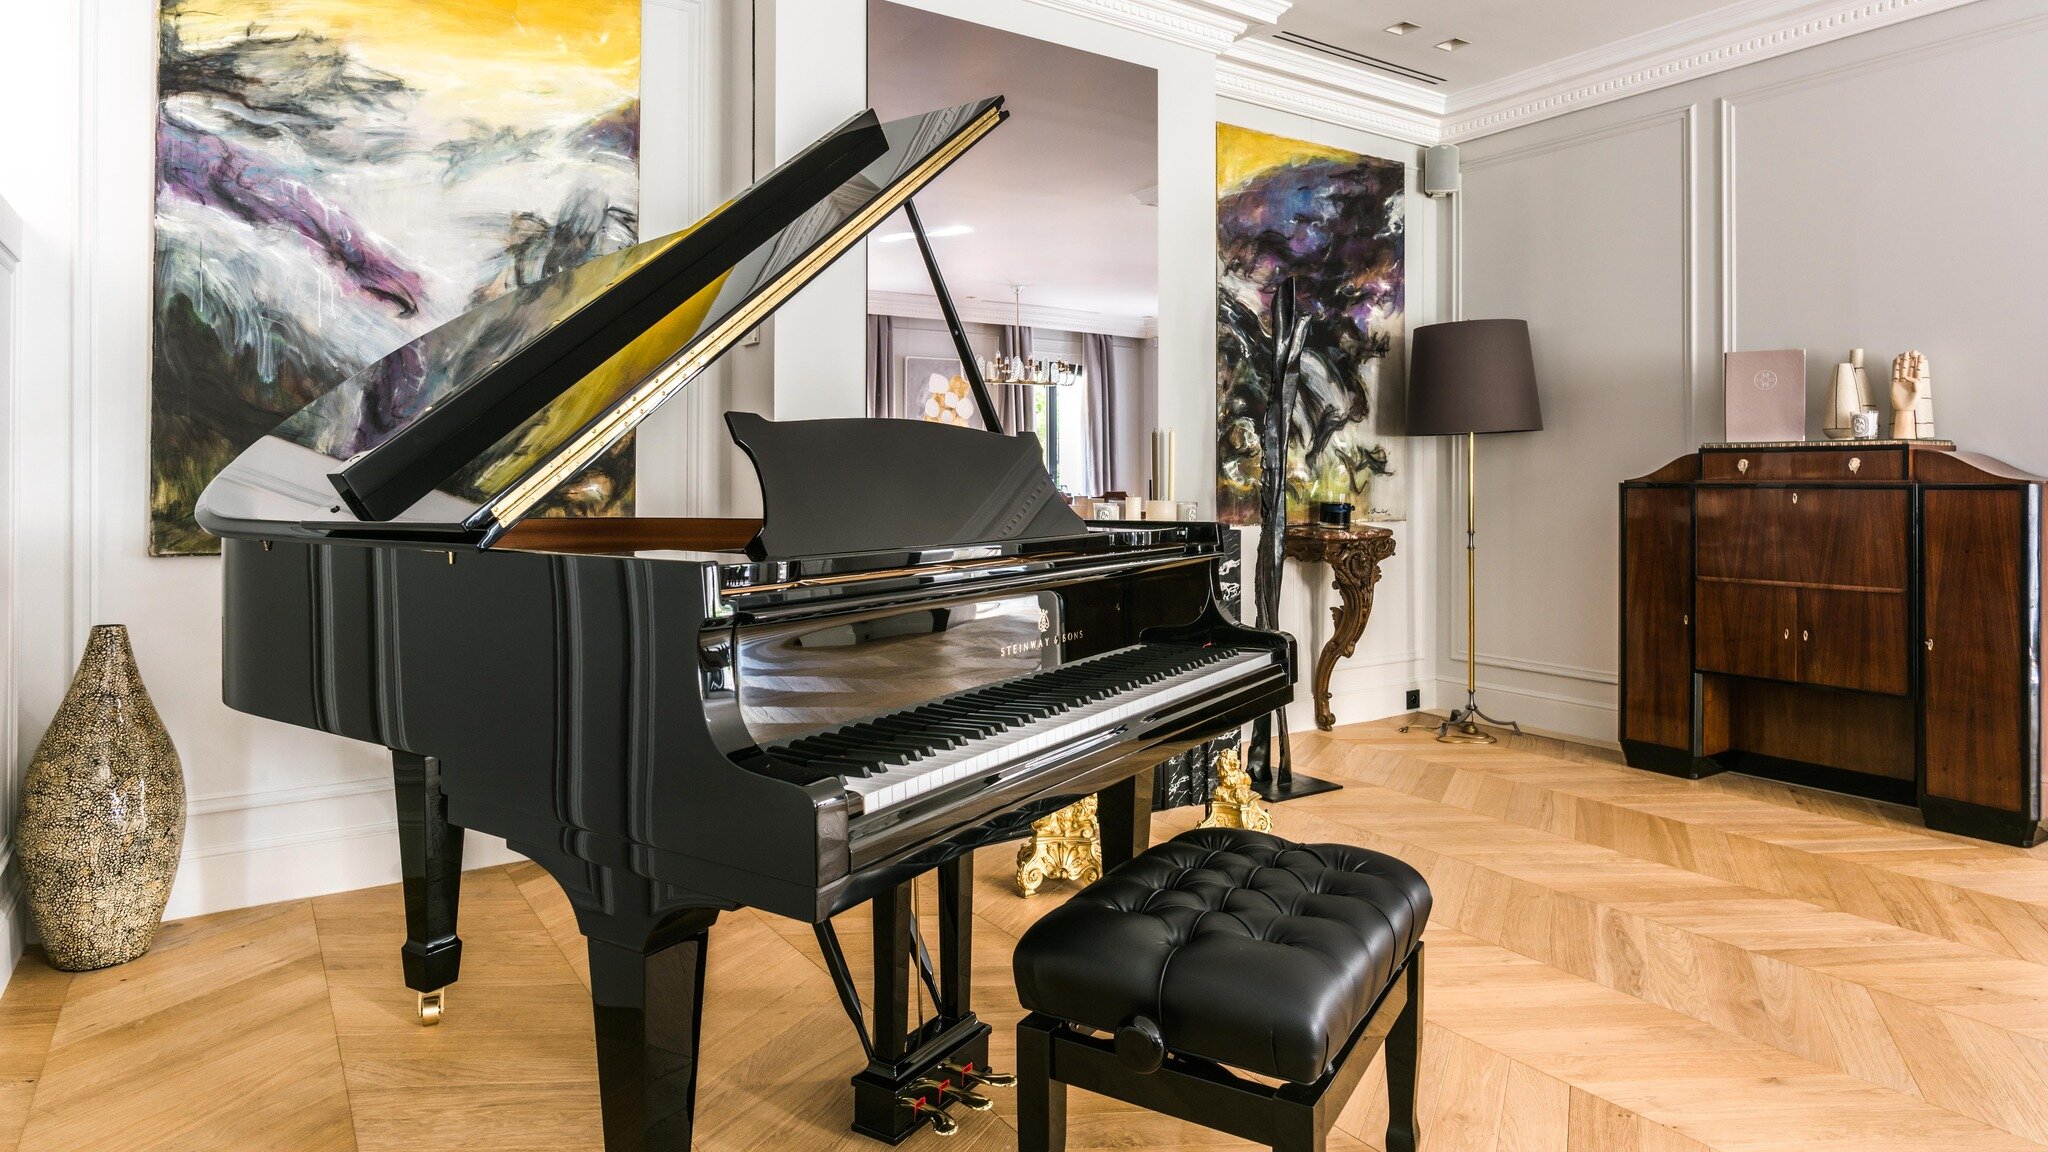 The spacious living area showcases a magnificent piano and and multiple works of art.

#maisonmontespan #maisonmontespanparis #hotelparticulier #luxuryhouse #privatehouse #interiordesign #patiodesign #parisrooftop #rooftop #luxuryrooftops #paris #mai